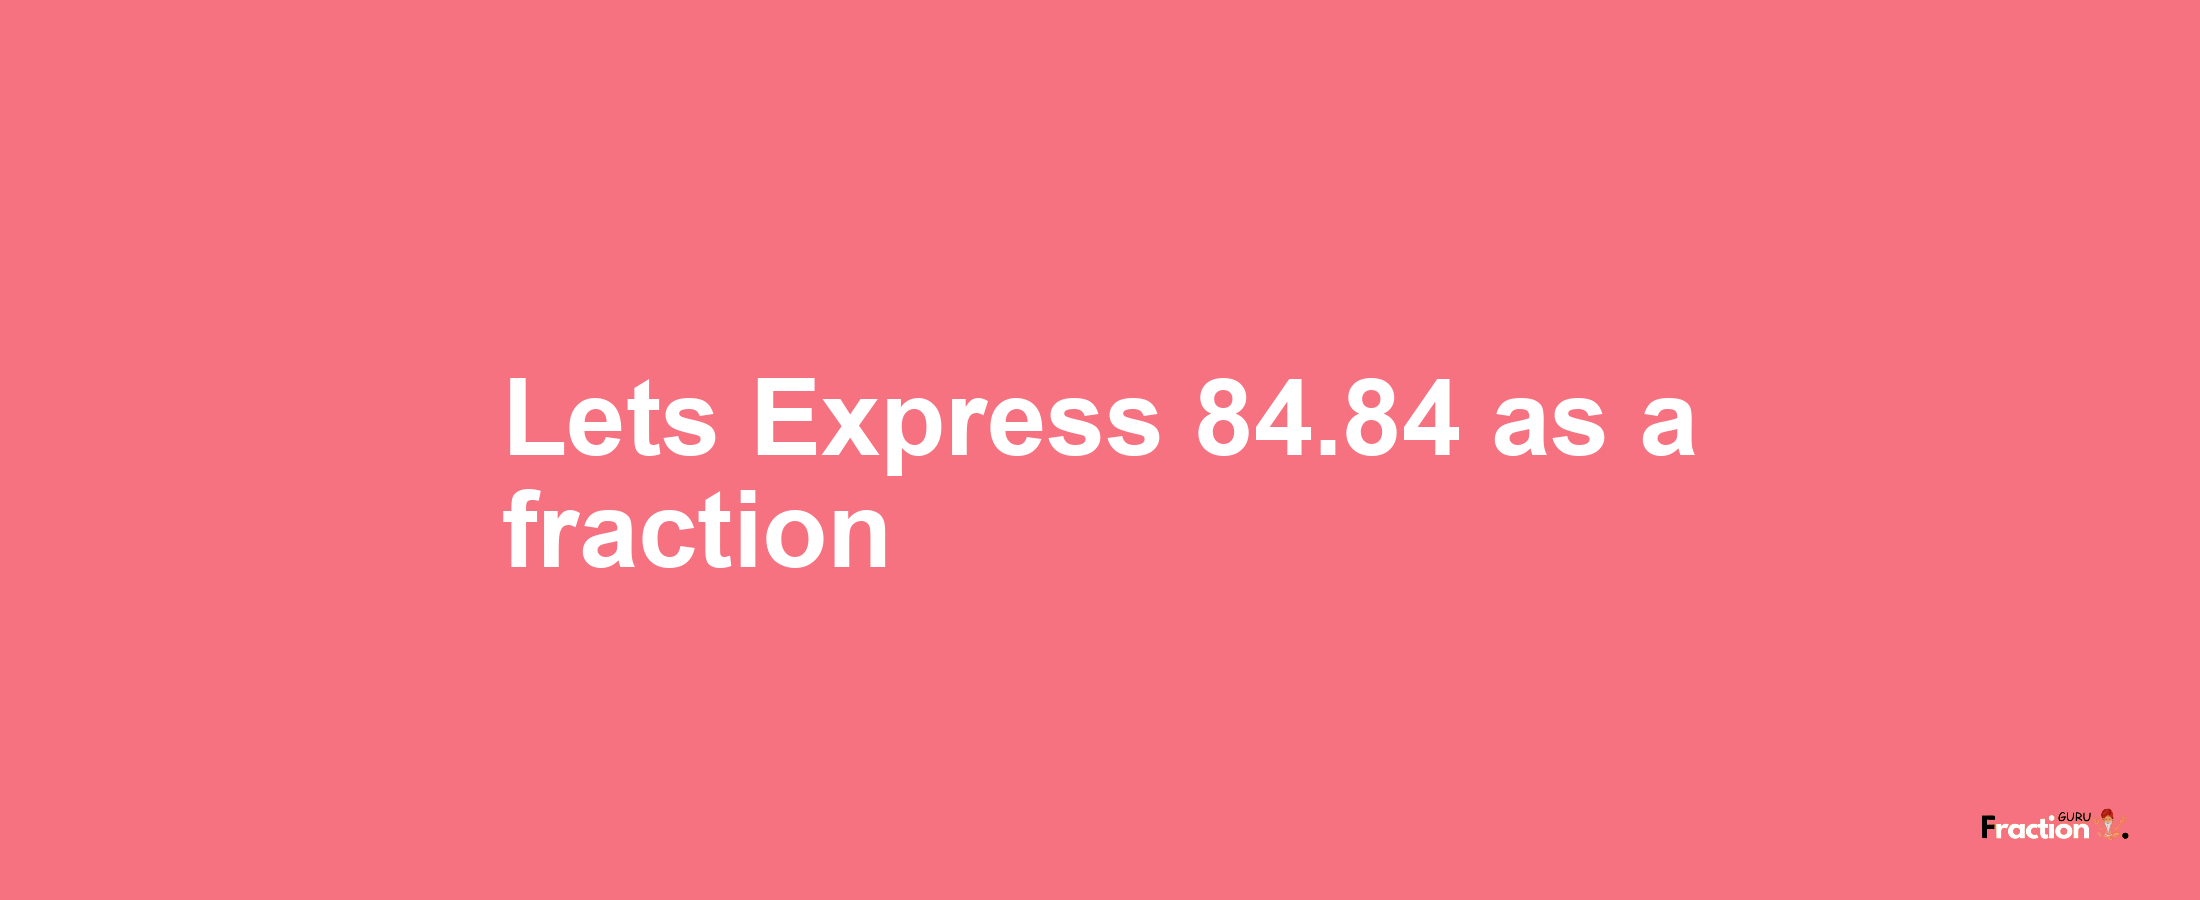 Lets Express 84.84 as afraction